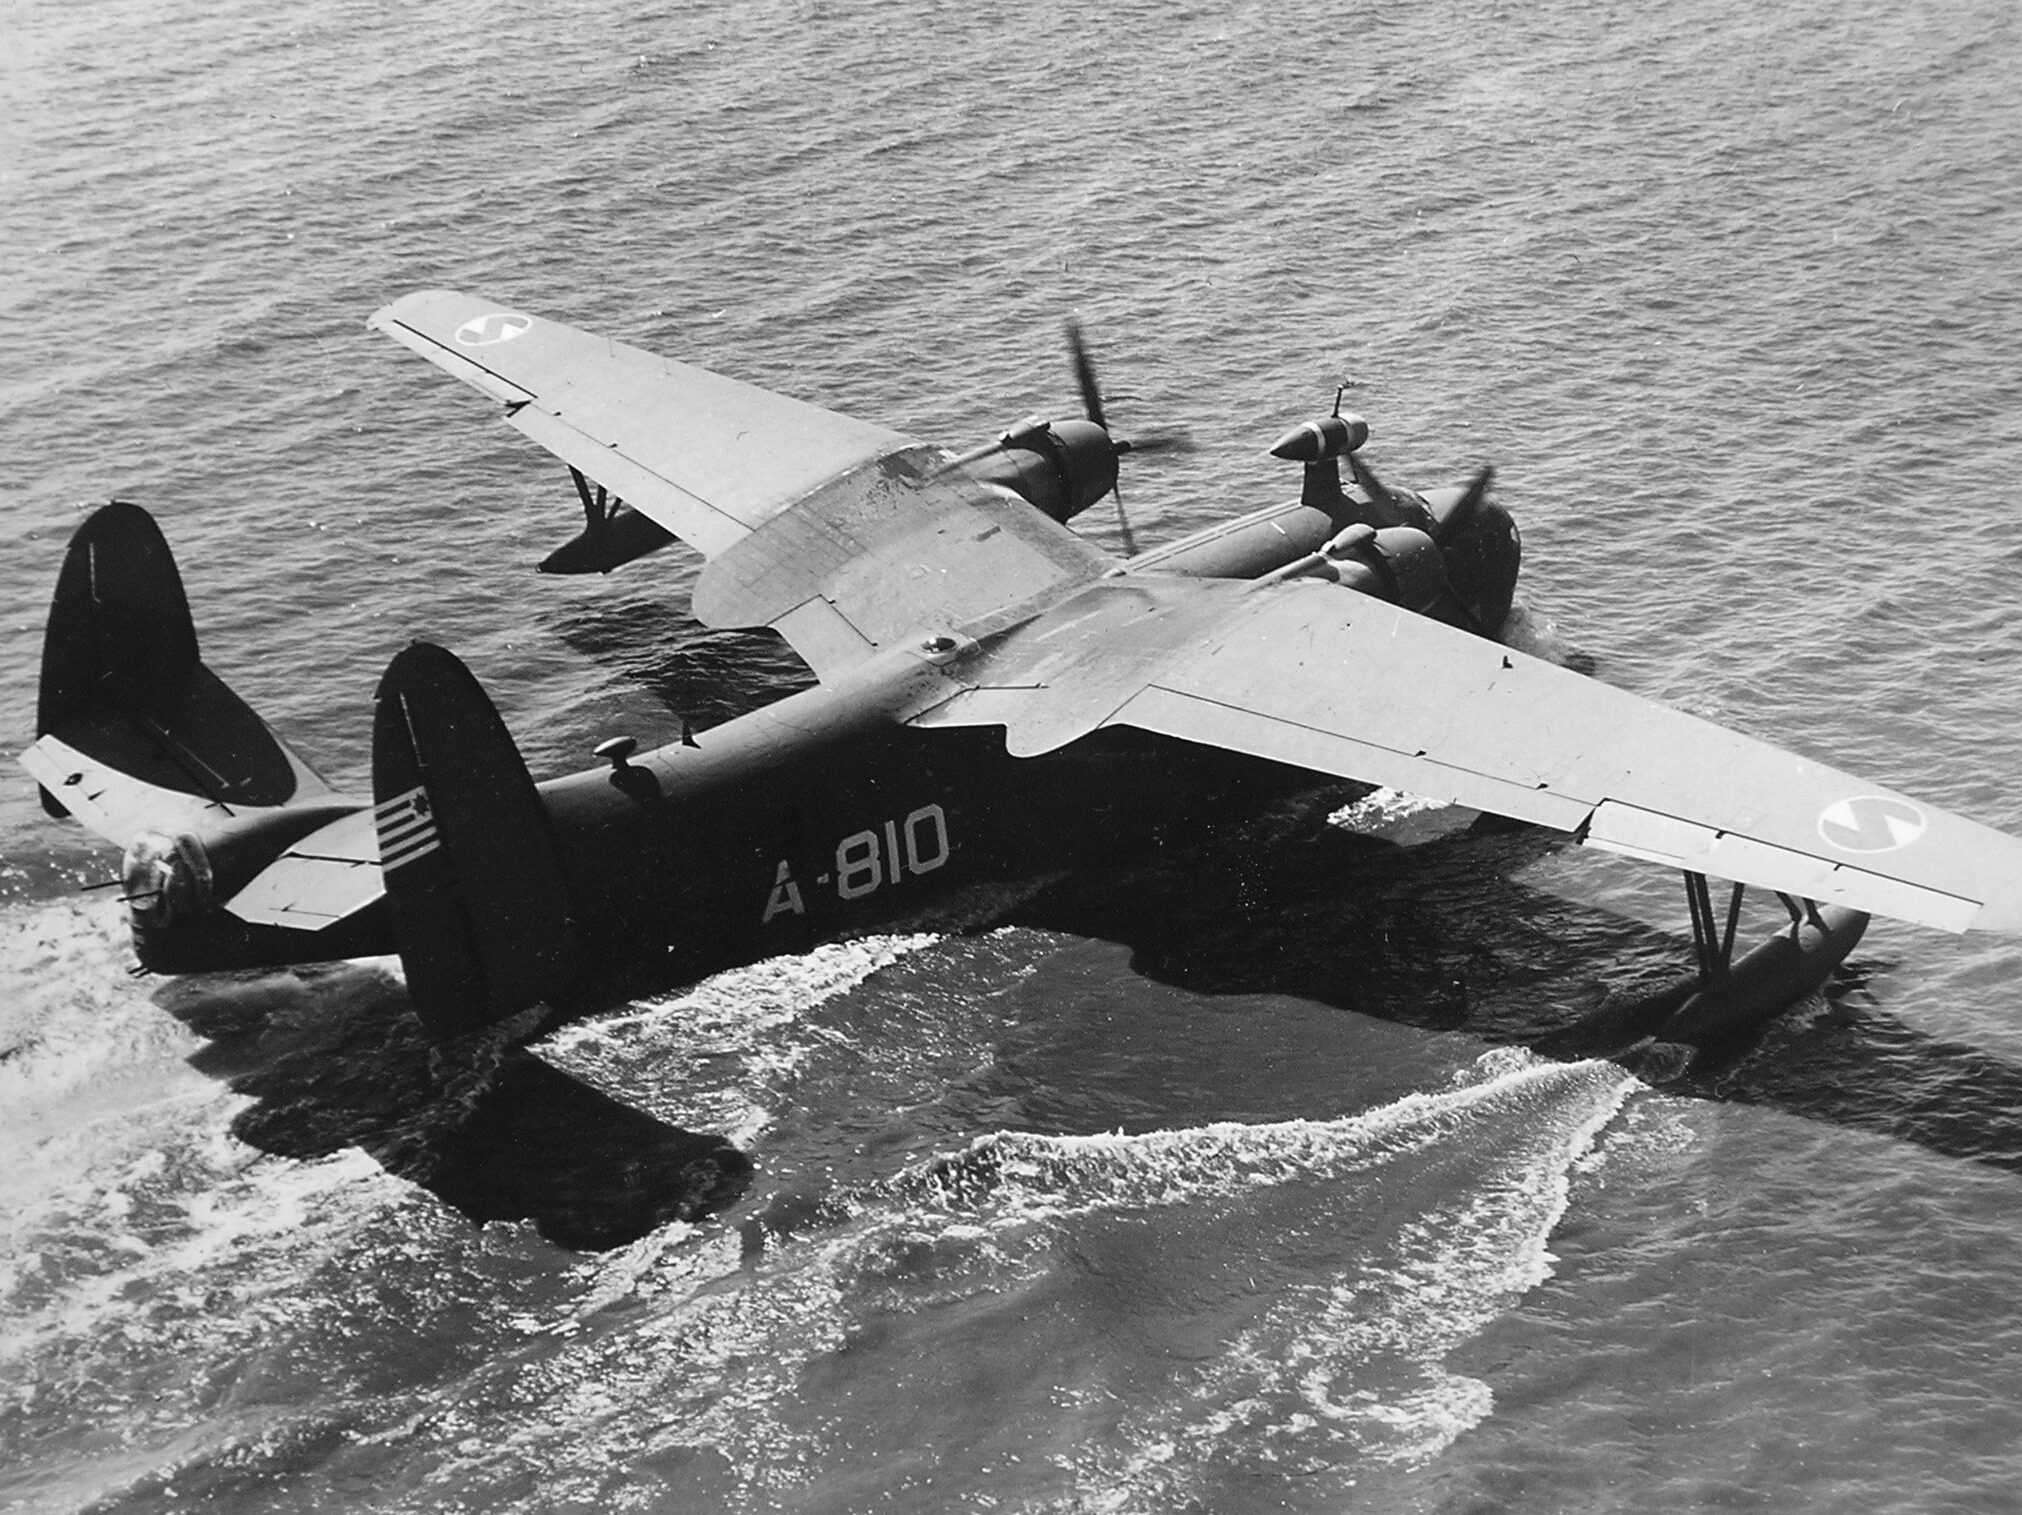 A U.S. Navy Martin PBM Mariner flying boat lands in calm Pacific waters. During the daring rescue of the SS Cape San Juan survivors, conditions were much different. The plane was eventually loaded with 55 passengers, including 48 men plucked from the water.